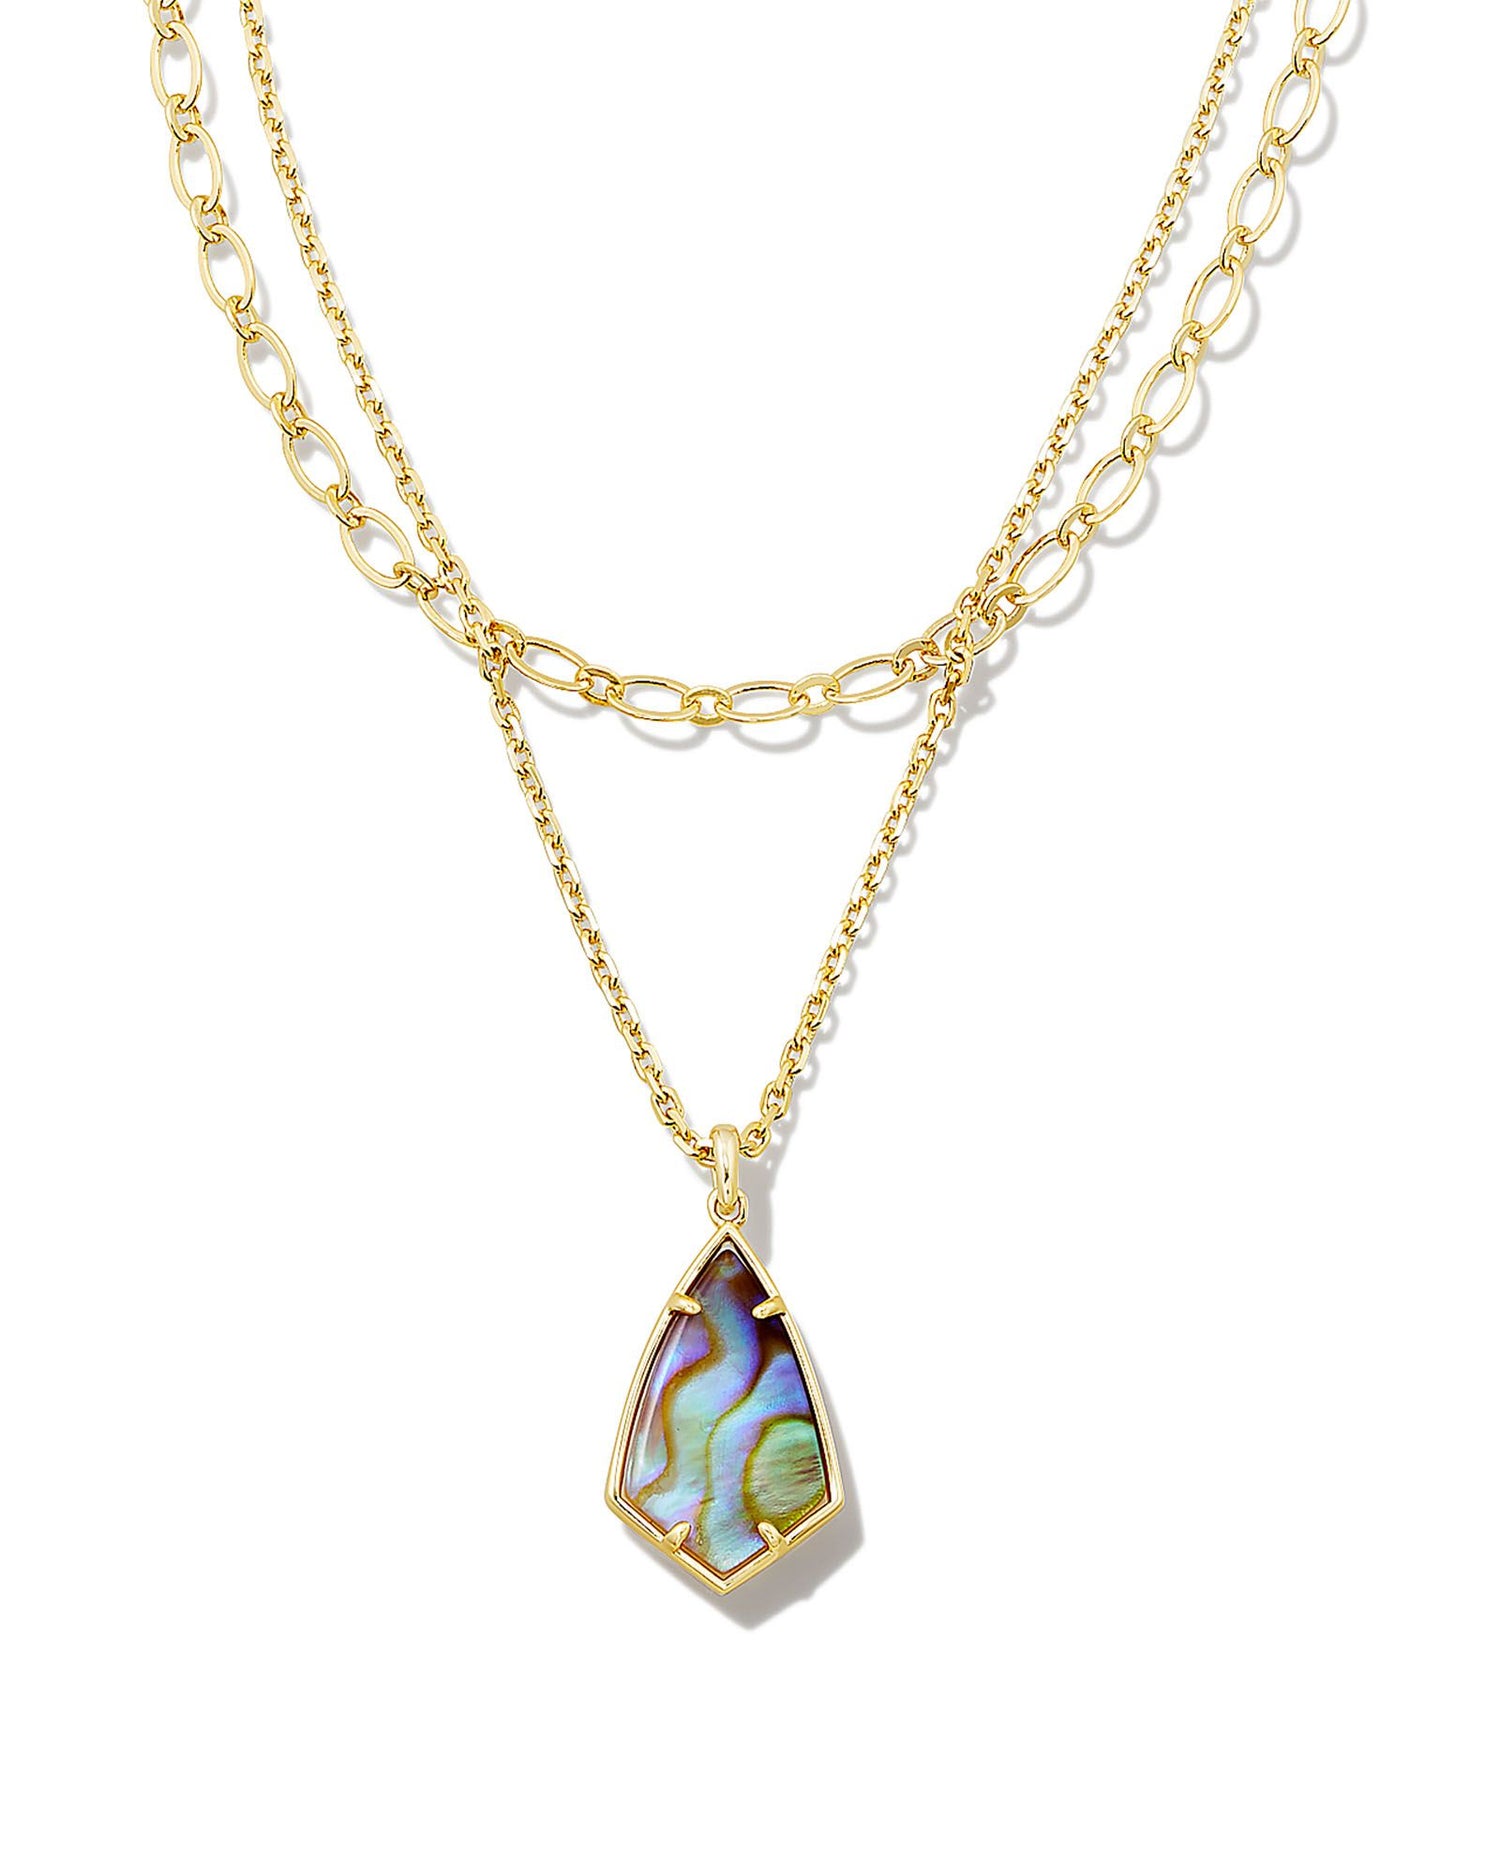 Our vintage (and much-loved!) Camry stone shape gets a modern update in the Camry Multi Strand Necklace. With two pre-layered chains and a gorgeous stone, this necklace makes staying on trend easier than ever. This metal is 24k gold plated over brass with an iridescent abalone stone. 